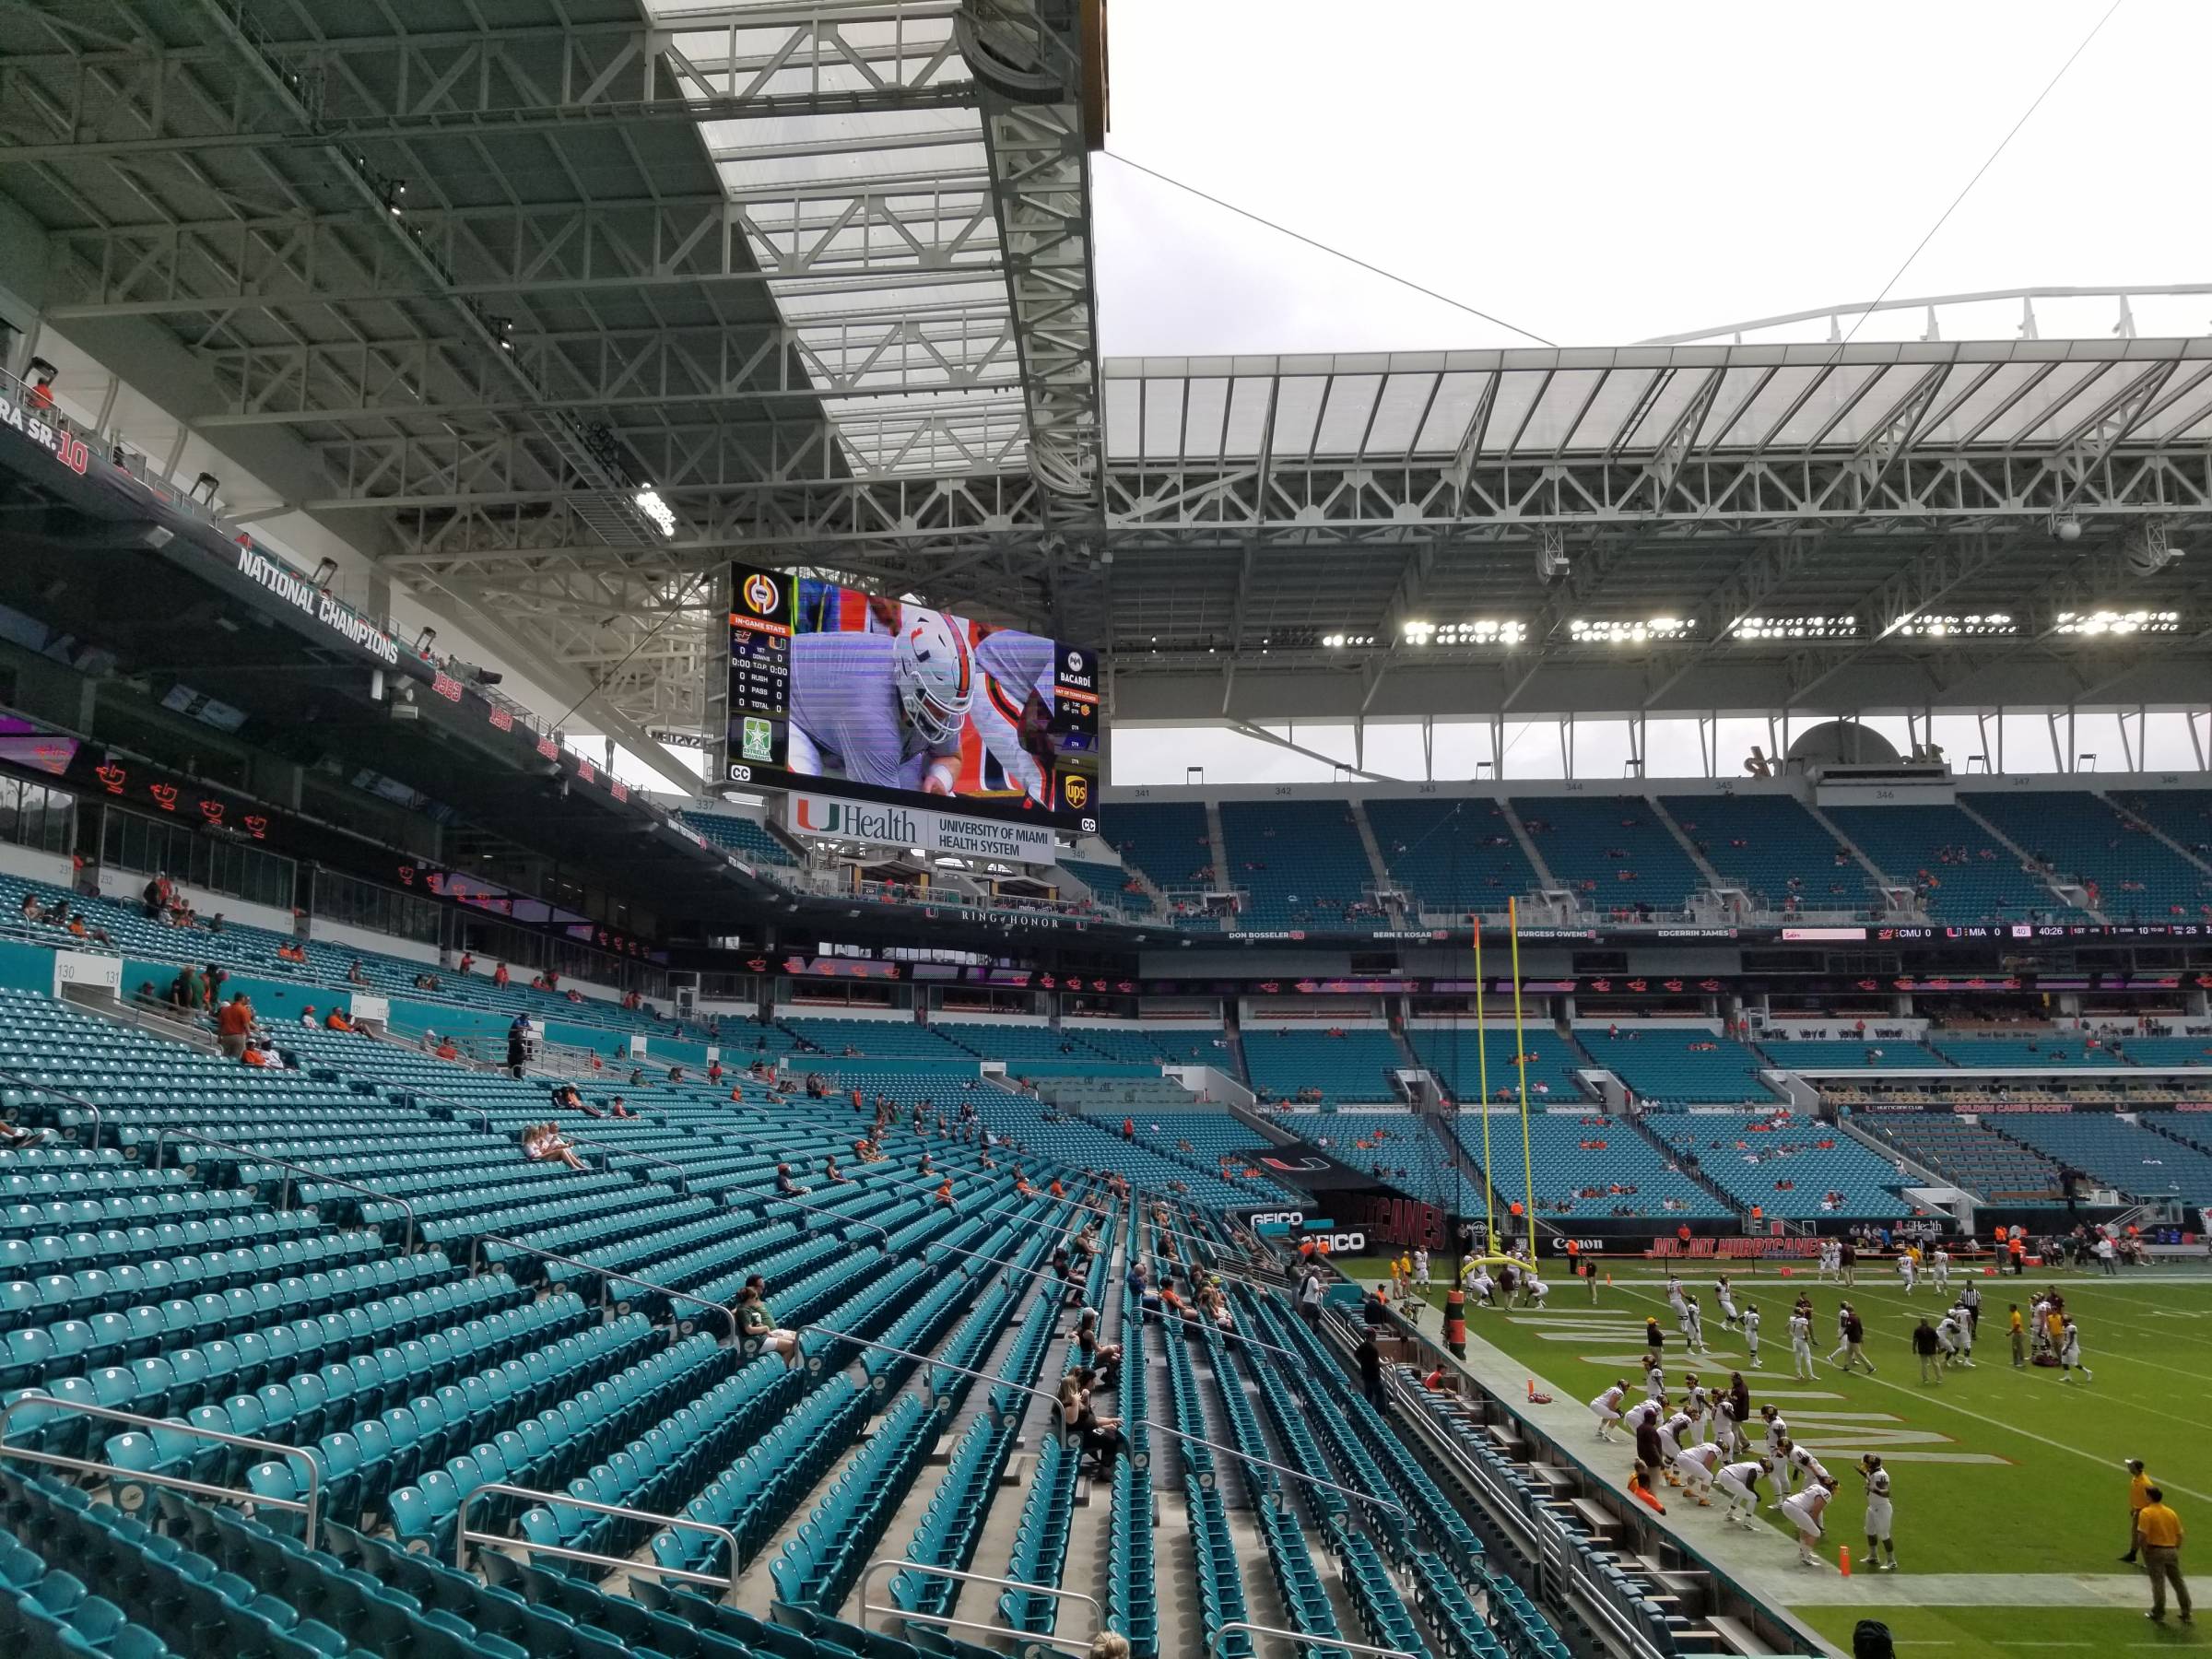 section 142 at hard rock stadium - miami dolphins